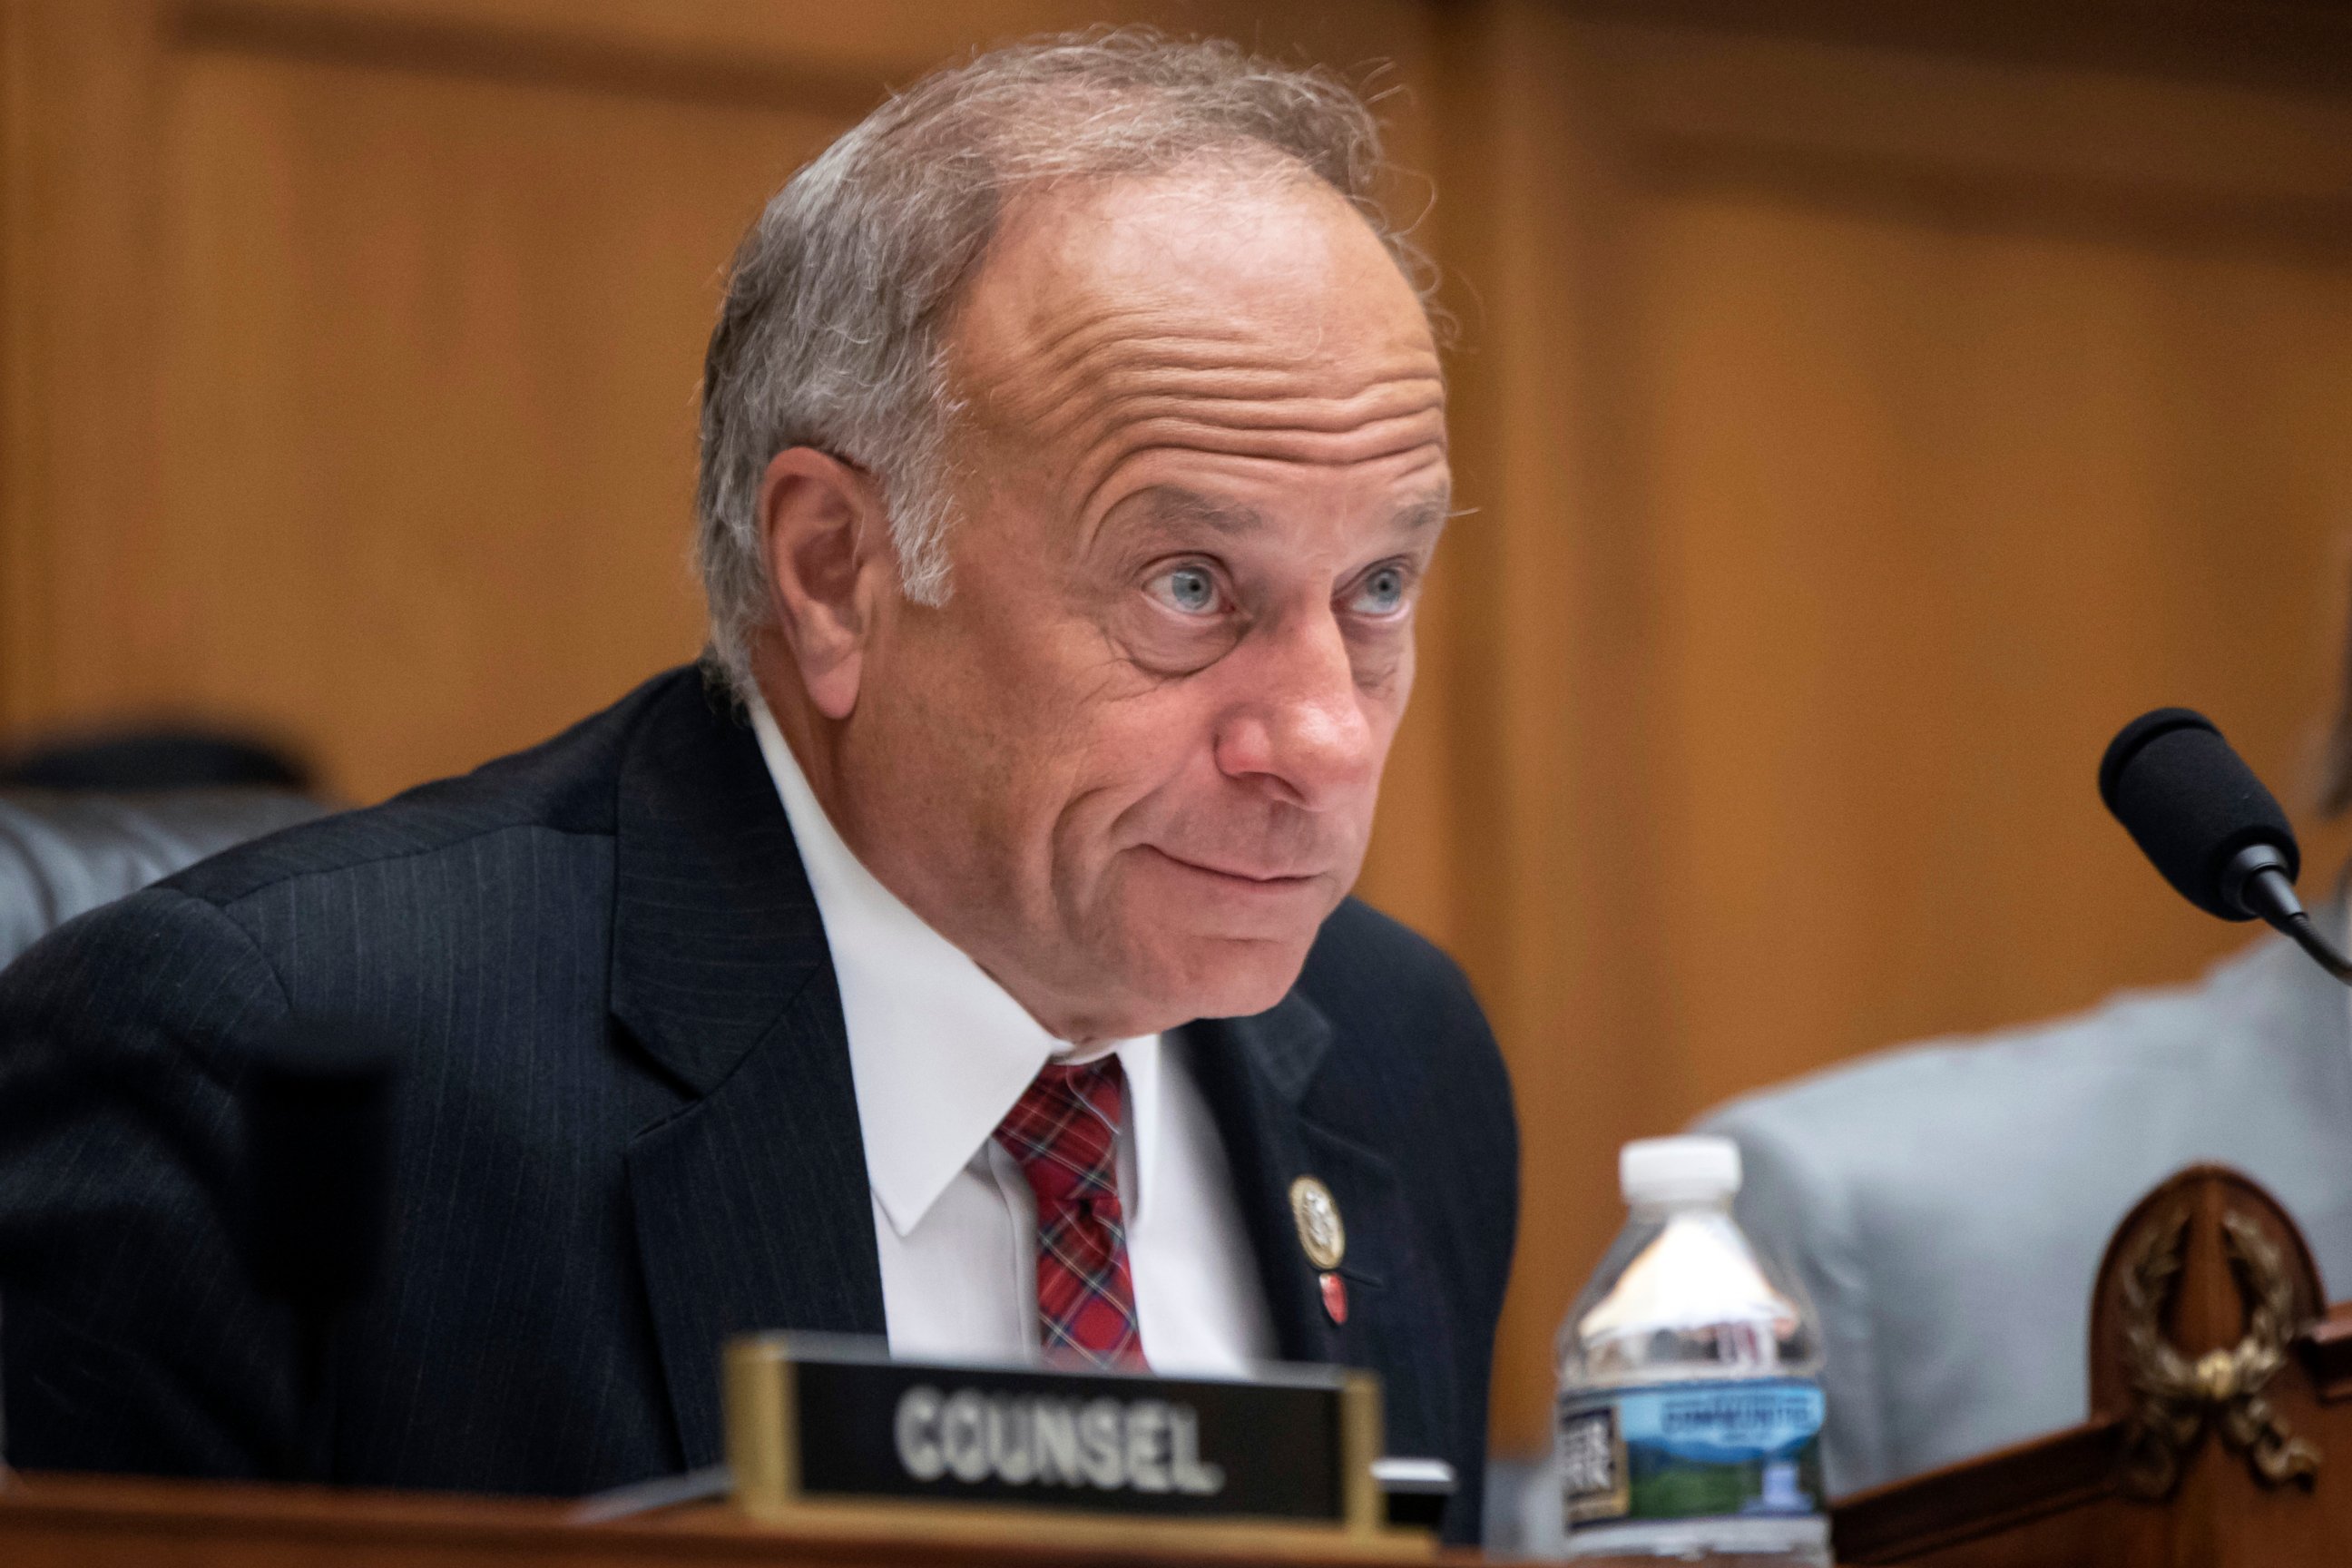 PHOTO: In this June 8, 2018, file photo, Rep. Steve King, R-Iowa, at a hearing on Capitol Hill in Washington.